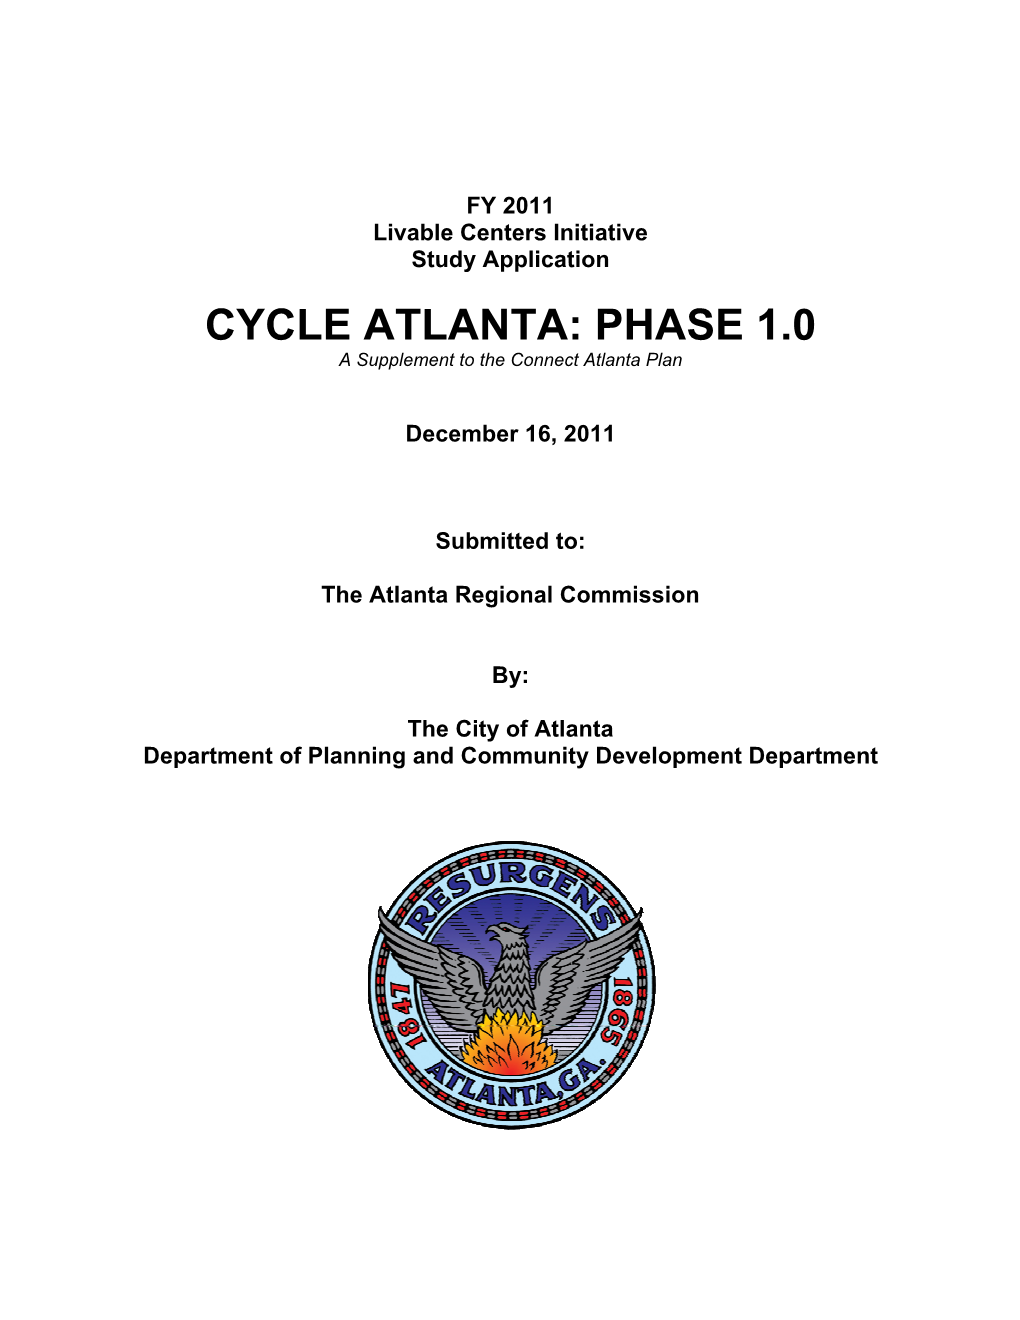 CYCLE ATLANTA: PHASE 1.0 a Supplement to the Connect Atlanta Plan